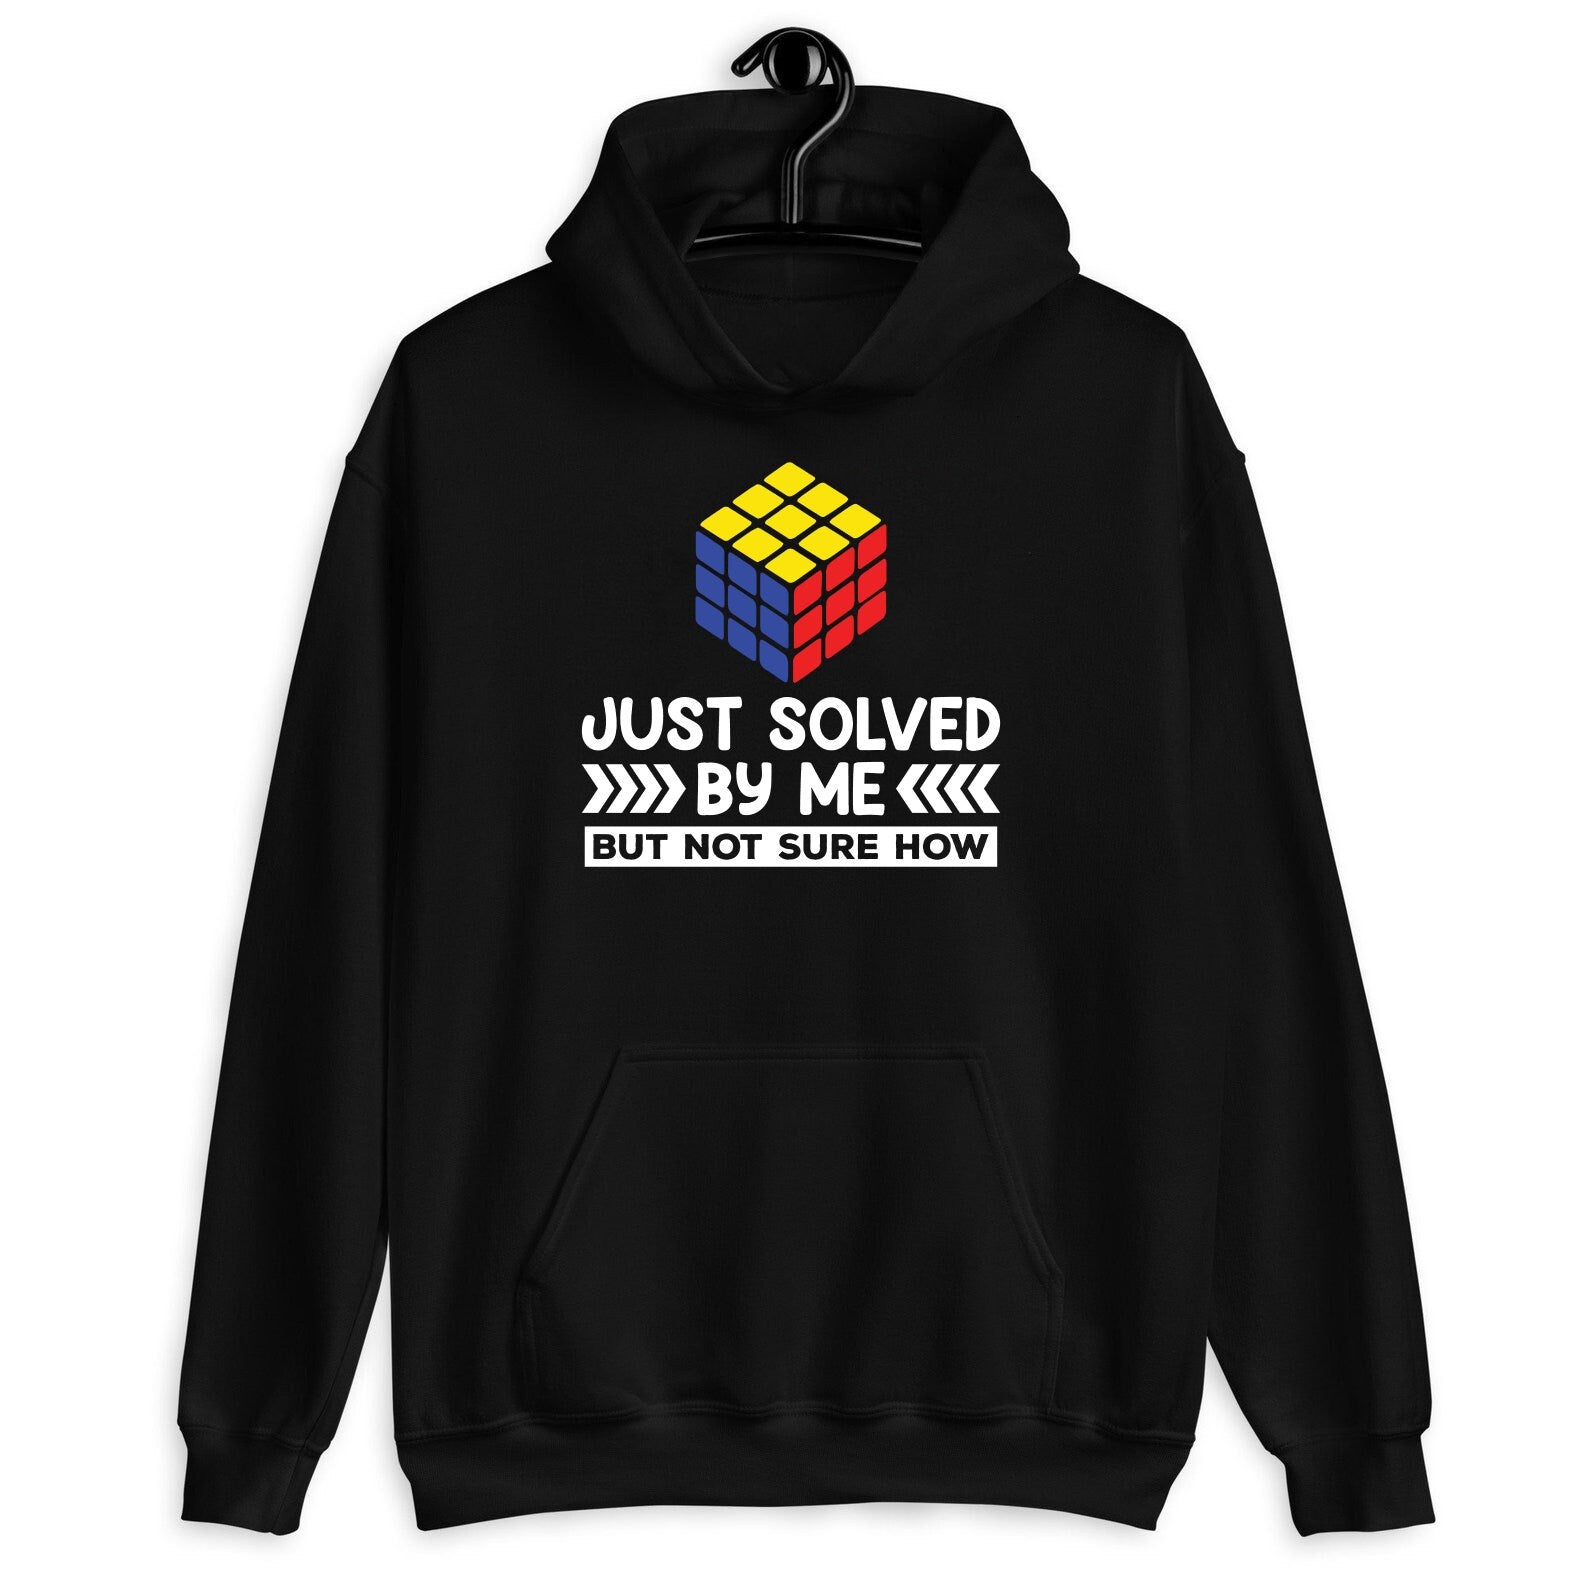 Just Solved By Me But Not Sure How Shirt, Rubik Competition, Rubik Cube Gift, Speed Cubing Shirt